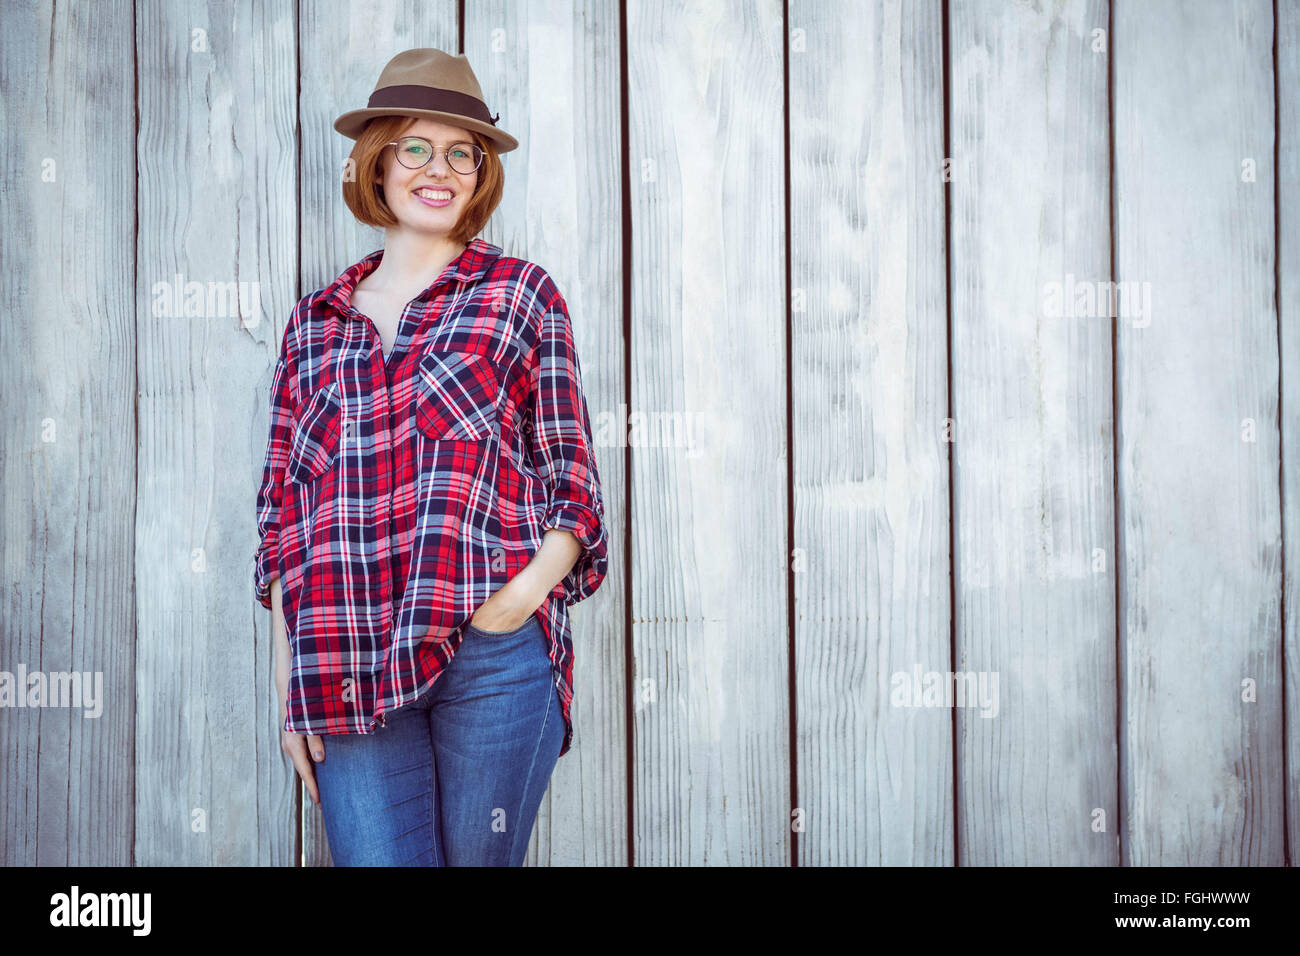 smiling hipster woman with her hand in her pocket Stock Photo